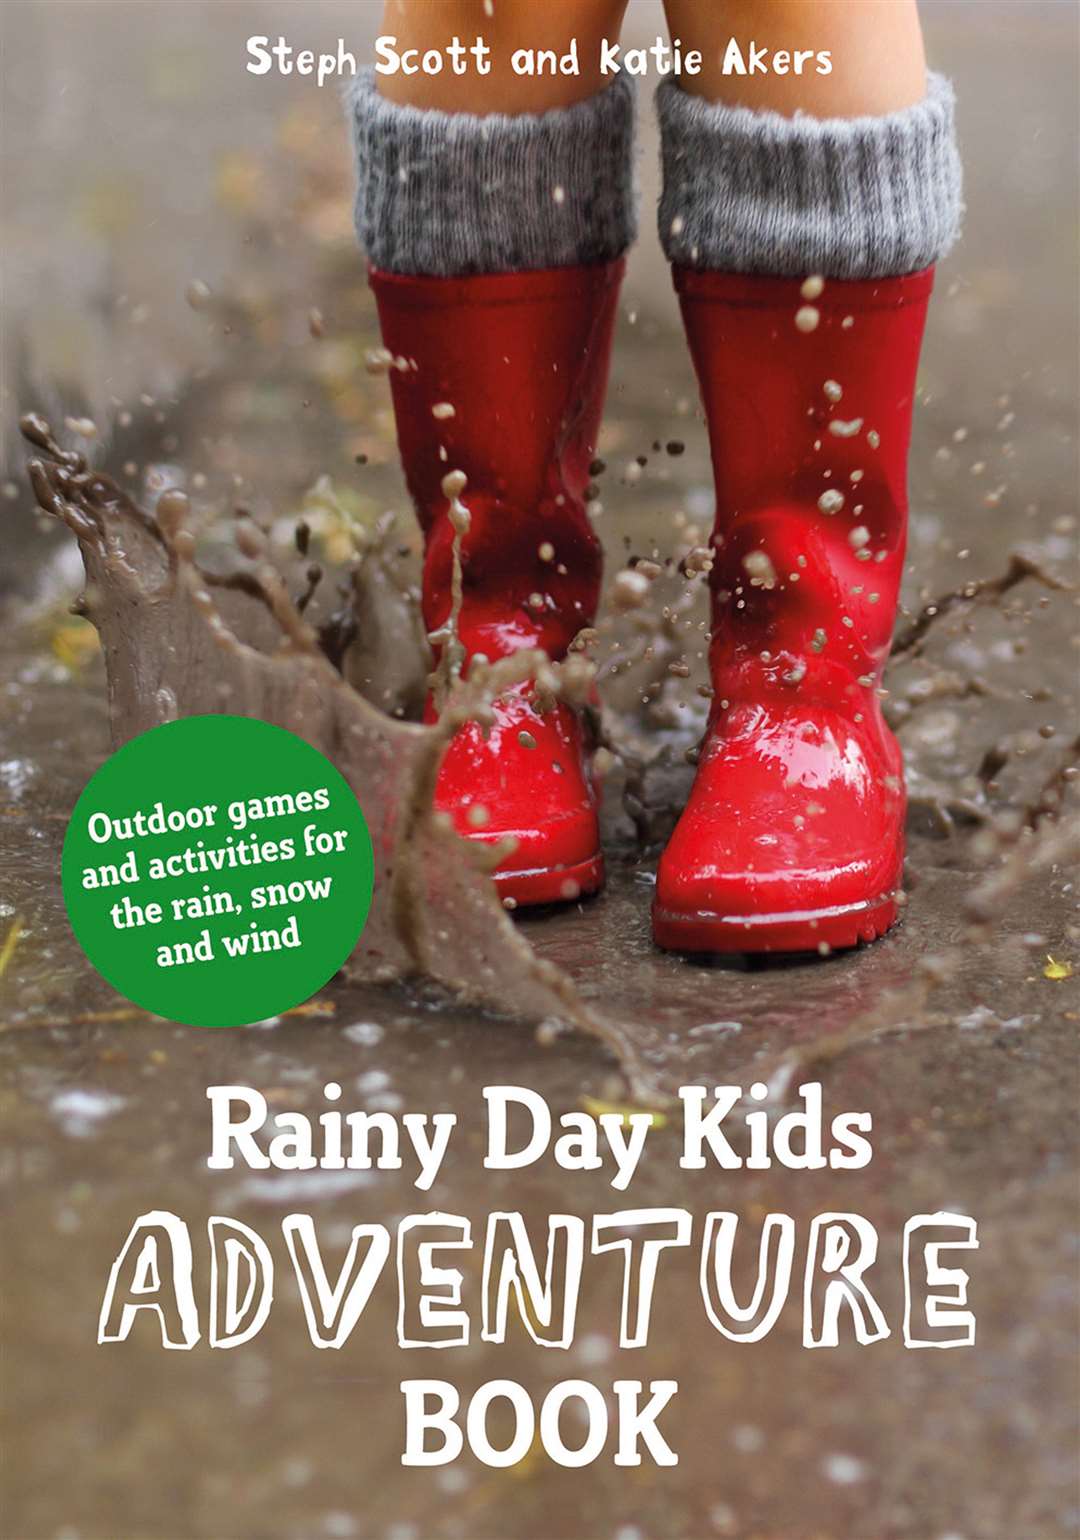 Rainy Day Kids Adventure Book by Steph Scott and Katie Akers, published by Batsford